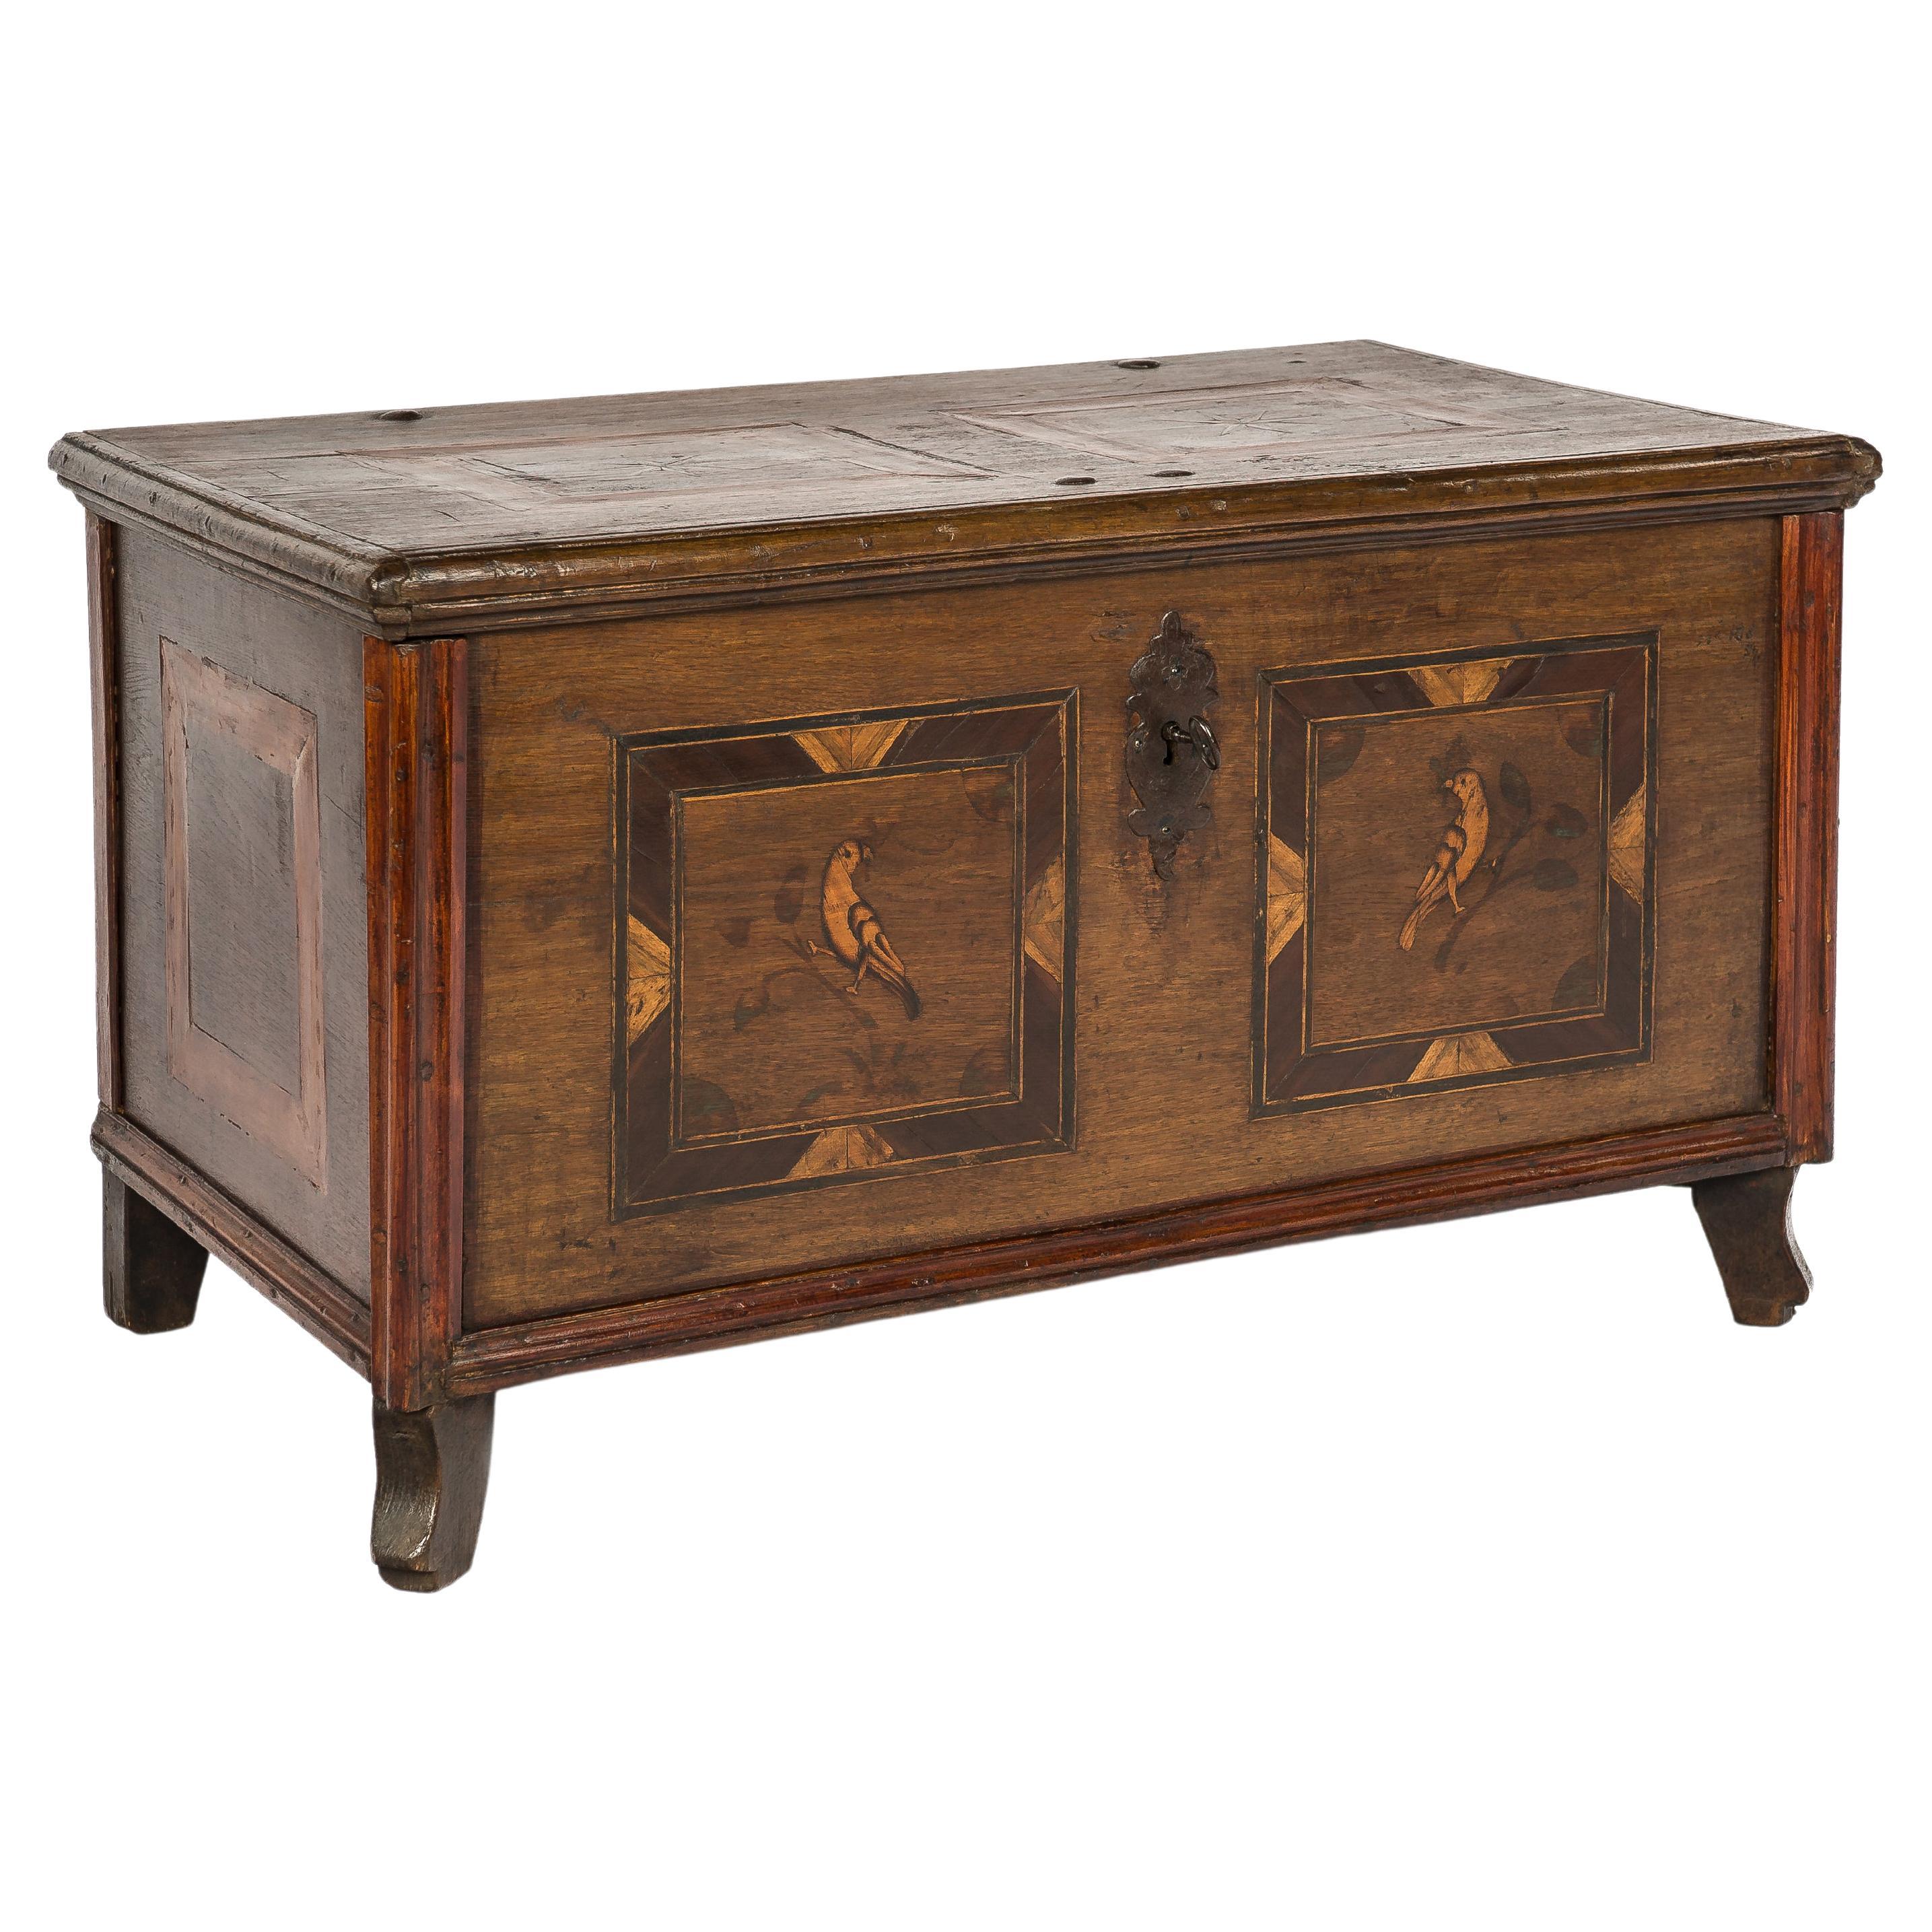 Antique Late 18th-Century German Oak and Fruitwood Marquetry Trunk or Chest For Sale